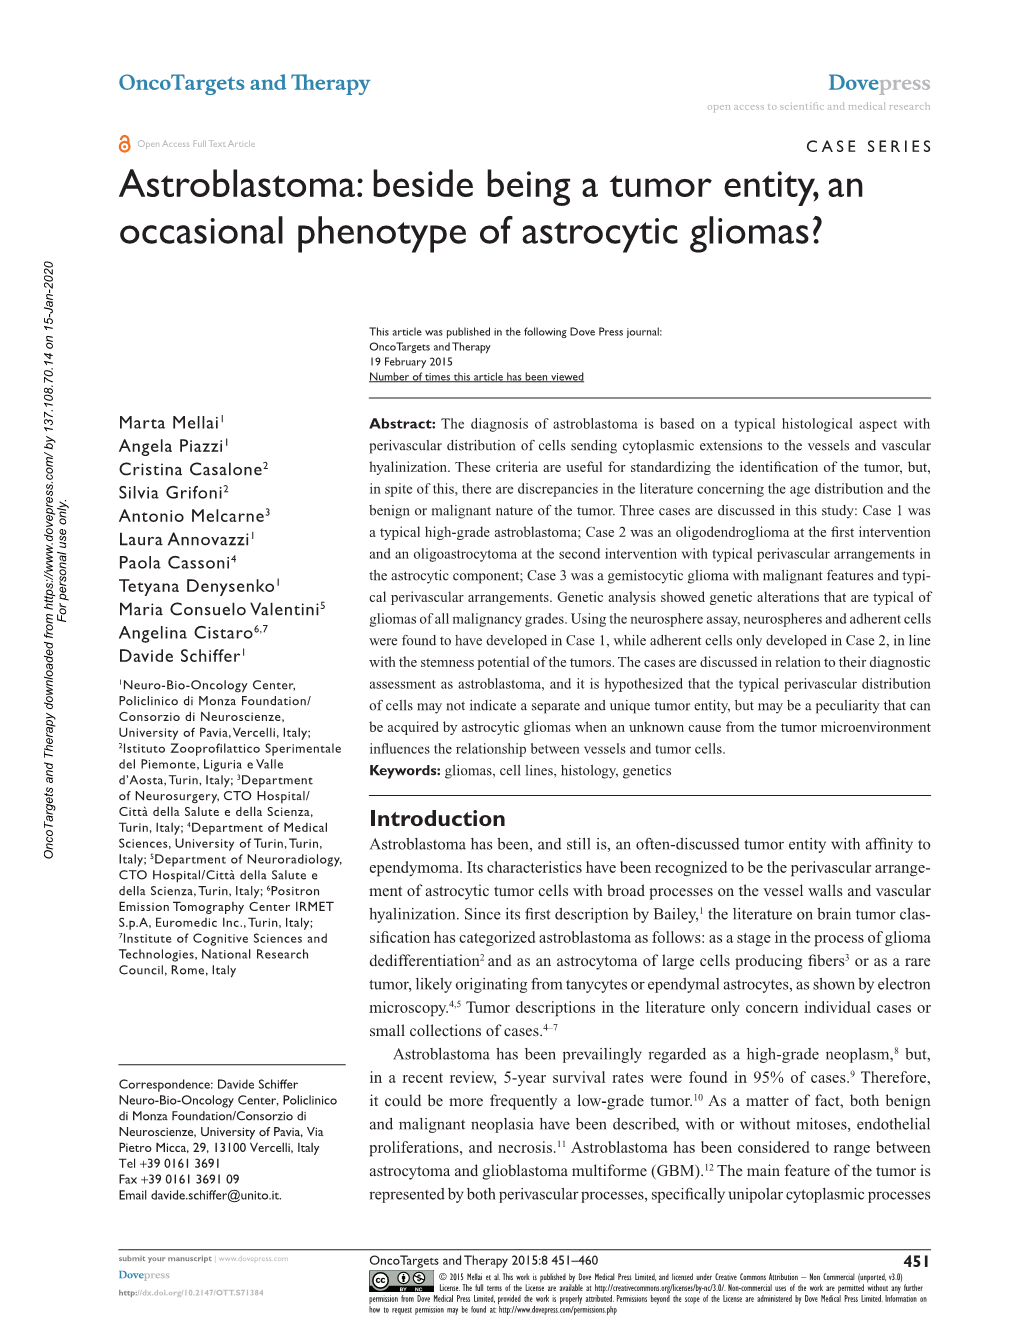 Astroblastoma: Beside Being a Tumor Entity, an Occasional Phenotype of Astrocytic Gliomas?